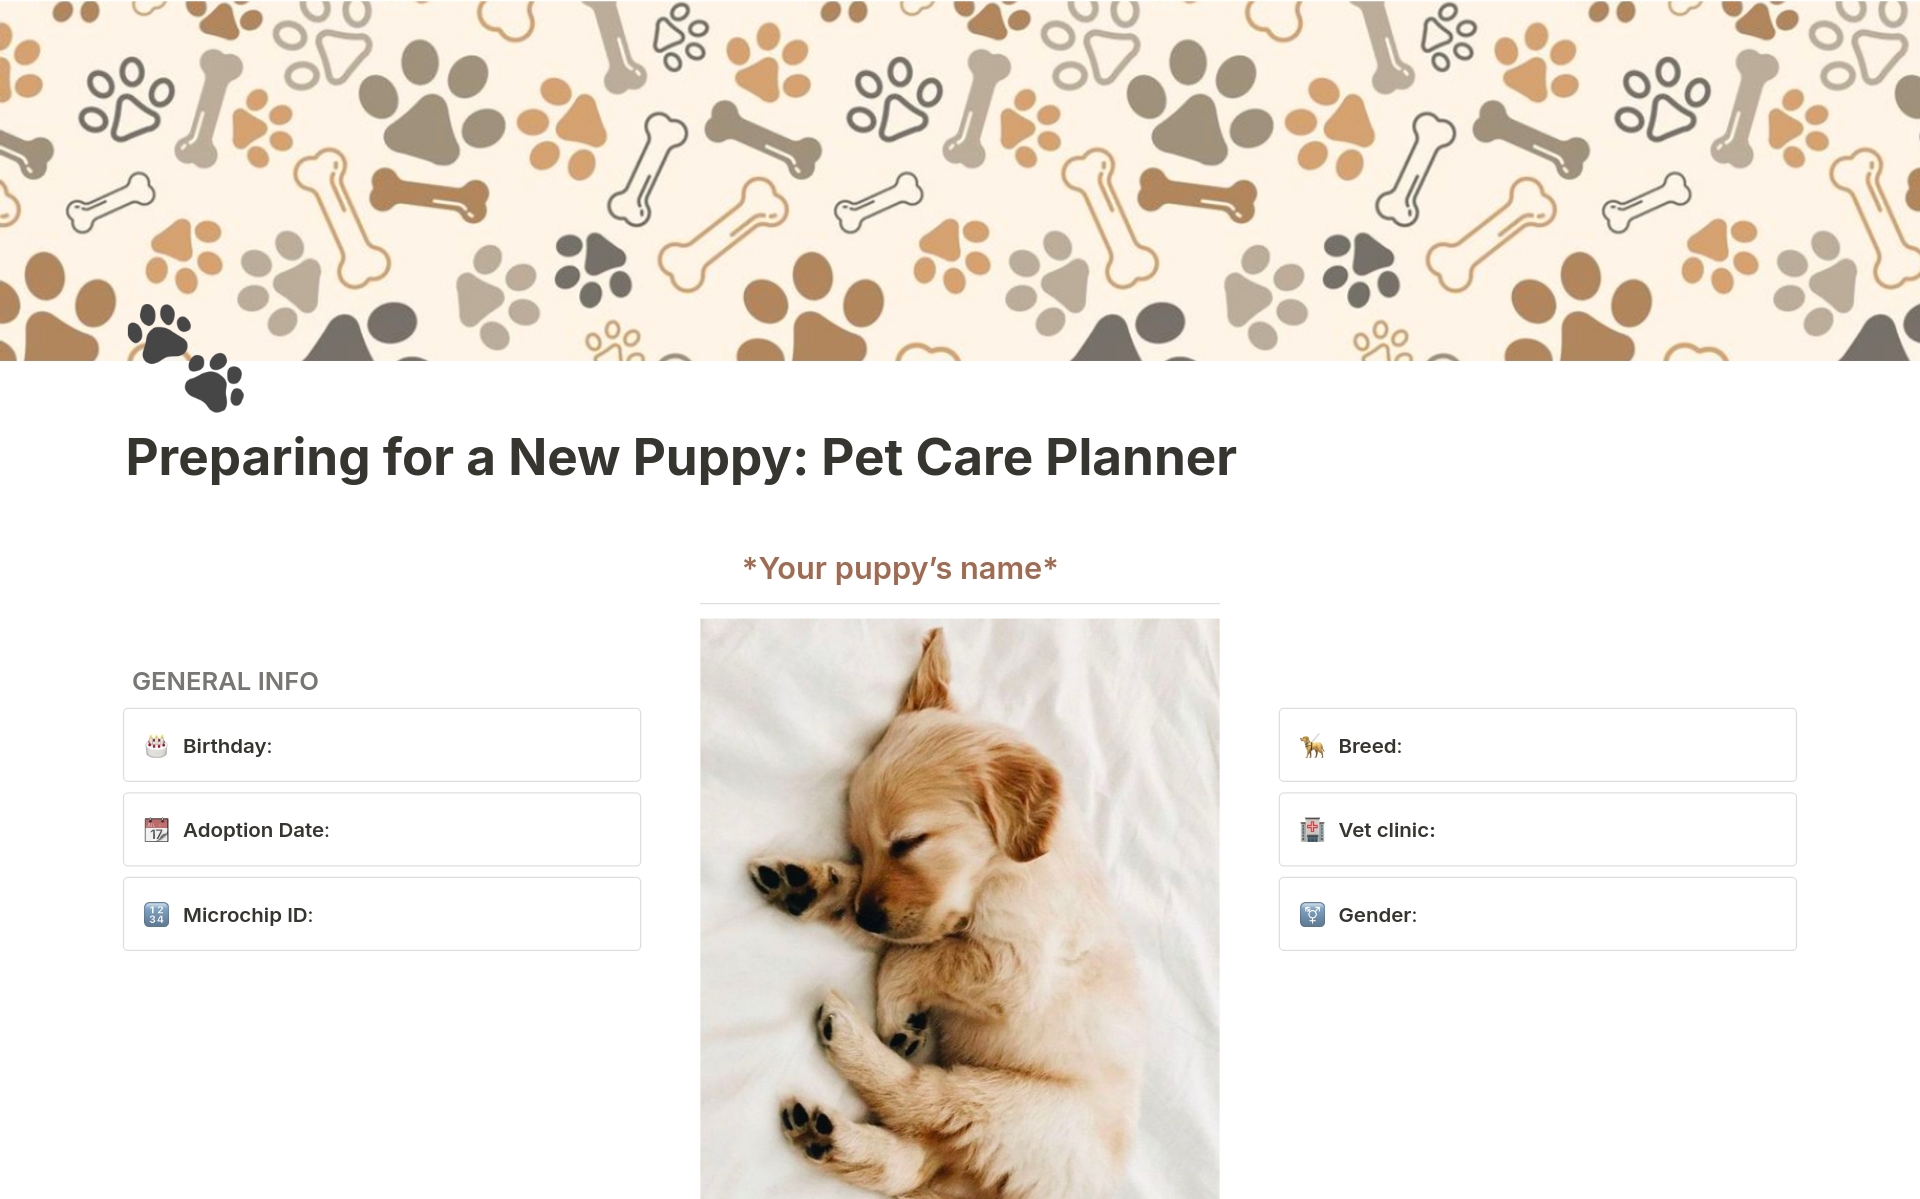 A template preview for Preparing for a New Puppy: Pet Care Planner